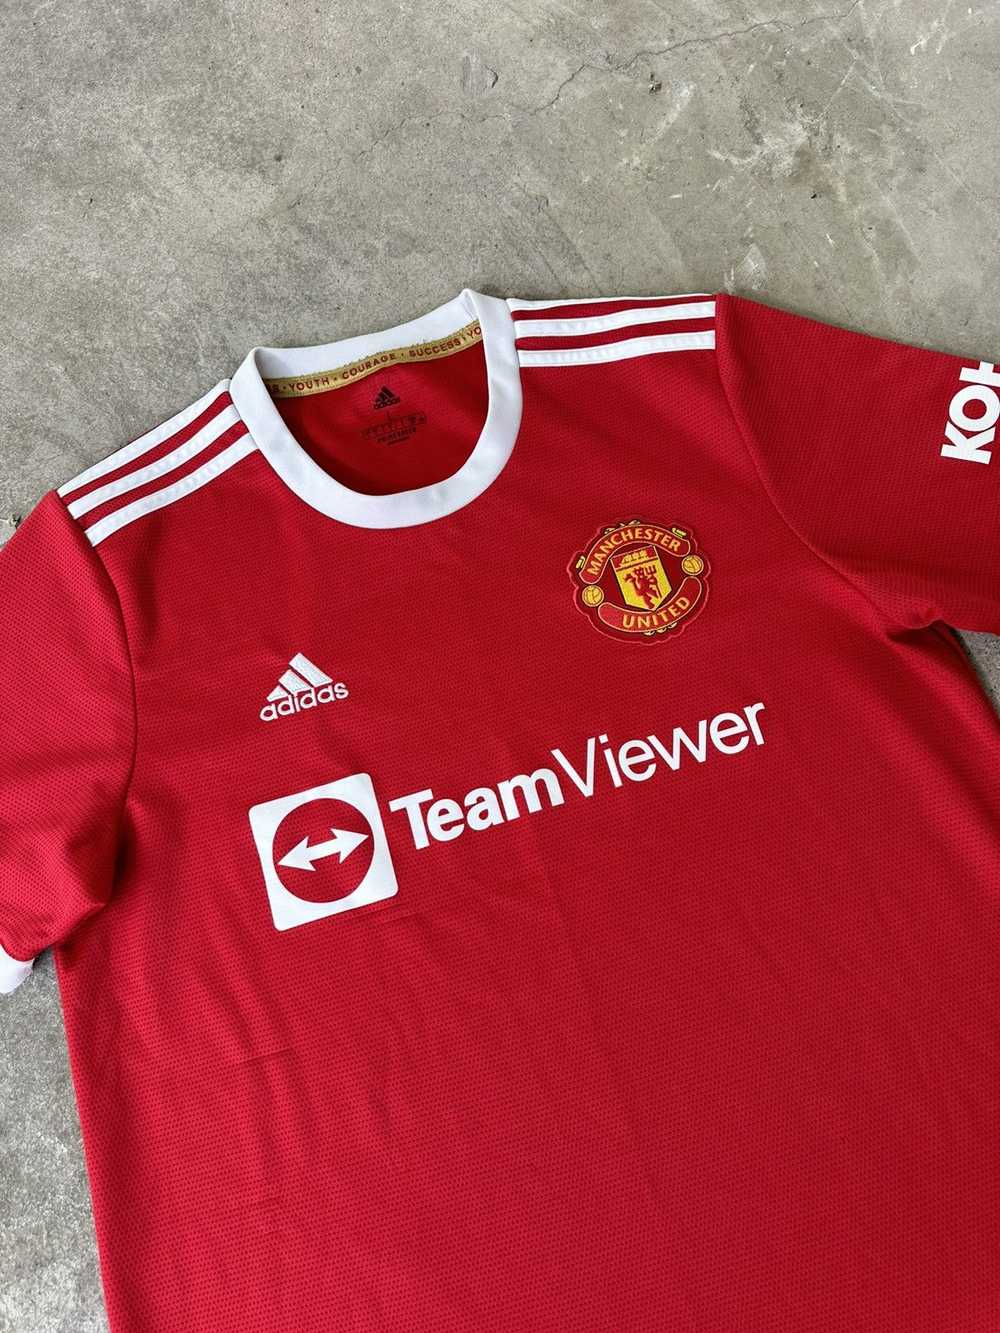 Adidas × Manchester United × Soccer Jersey MANCHE… - image 2